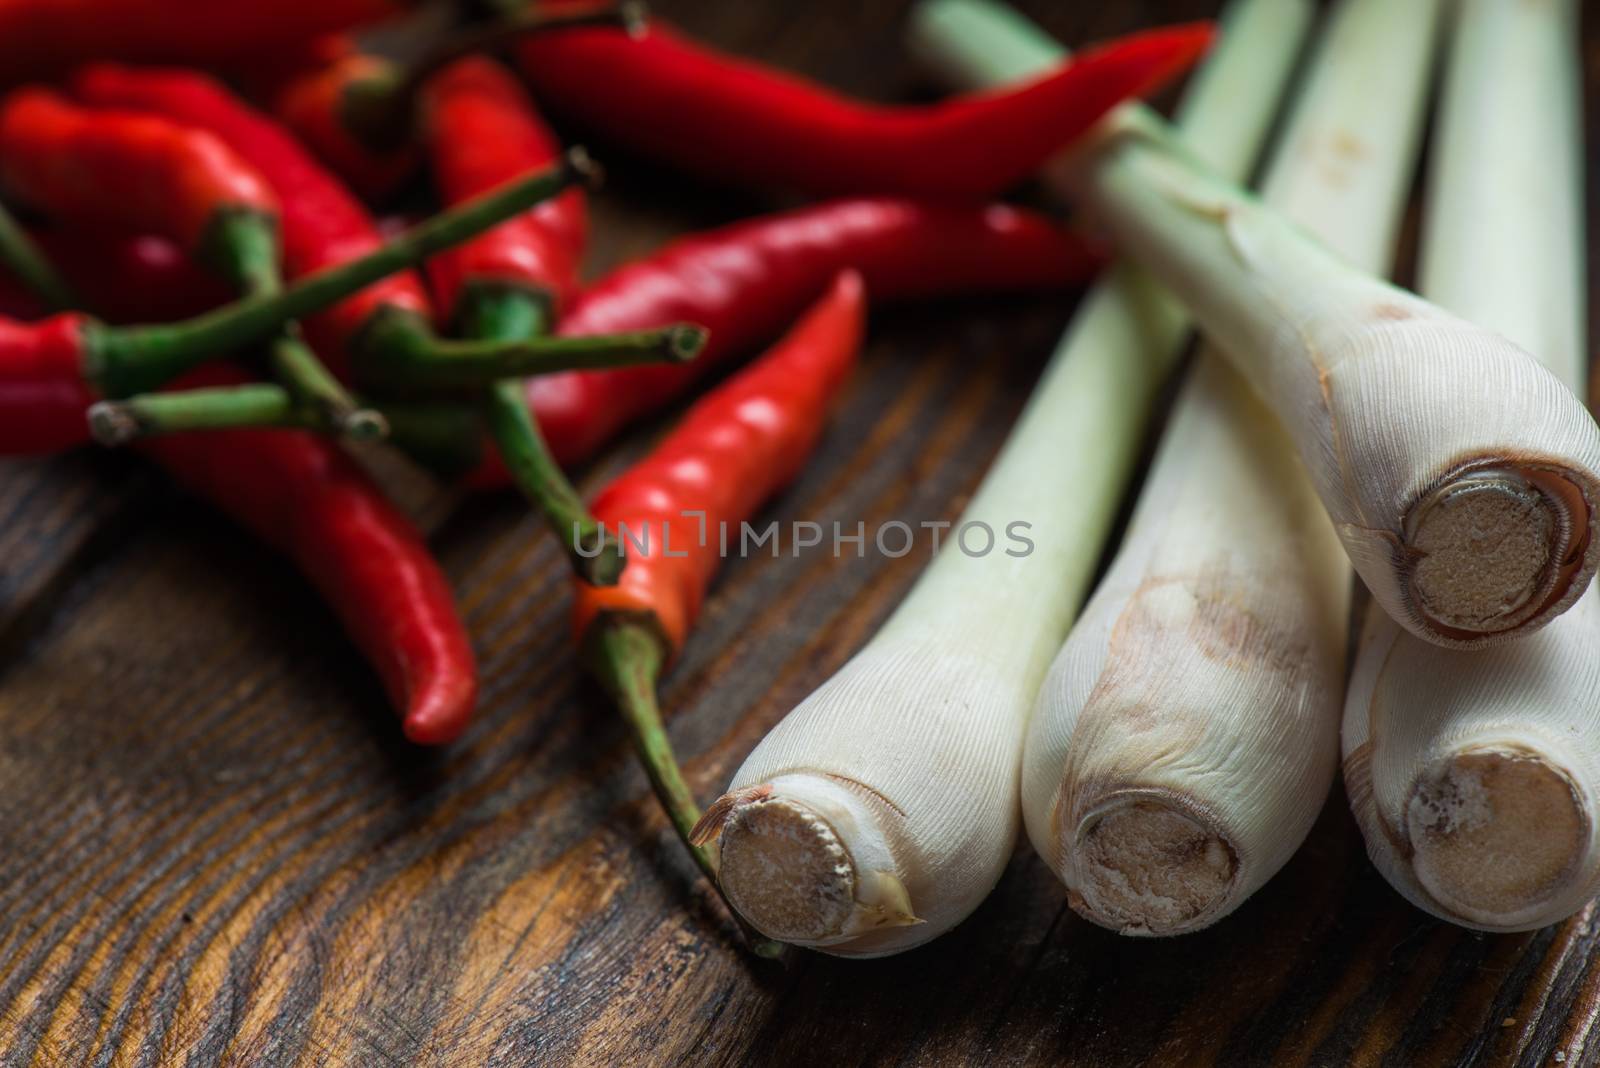 Mexican chili peppers with lemongrass scattered on the wooden table. Food close up background